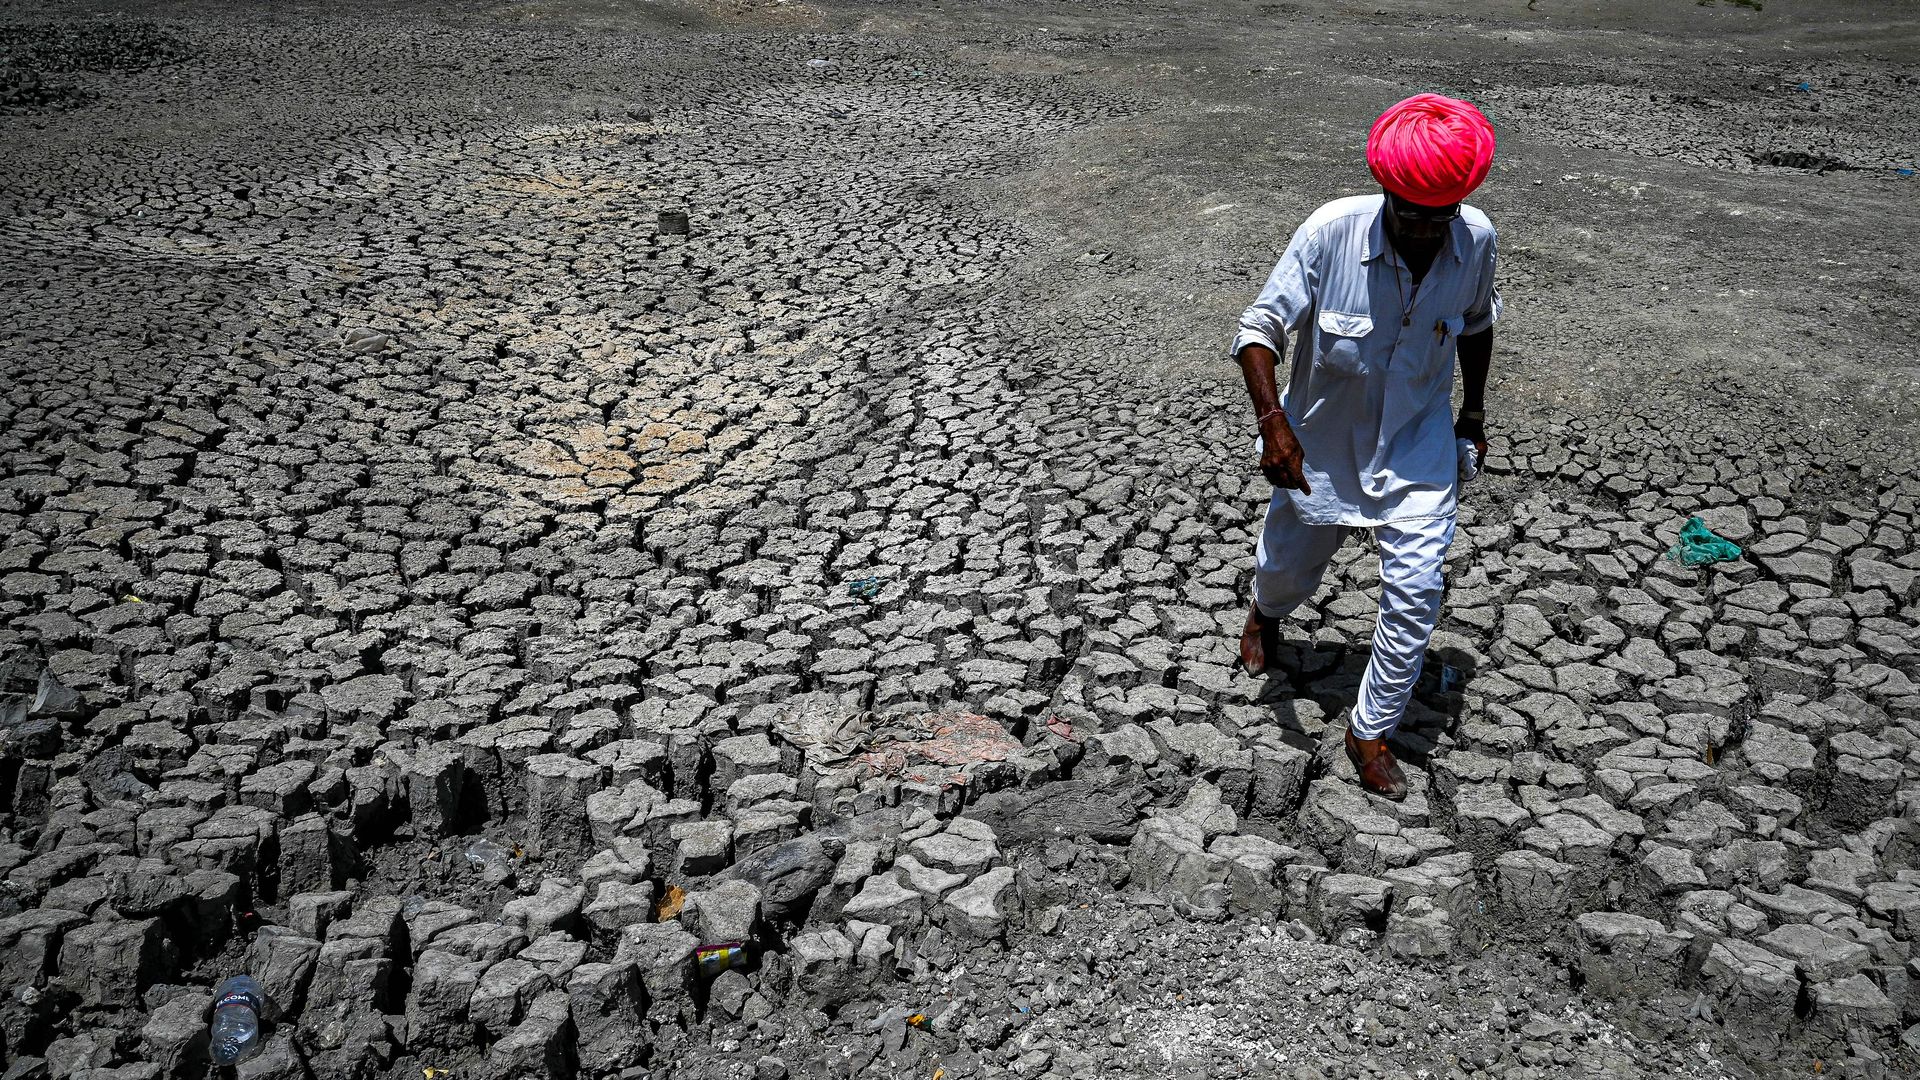 A villager walking through the cracked bottom of a dried-out pond on a hot summer day at Bandai village in Pali district, India.